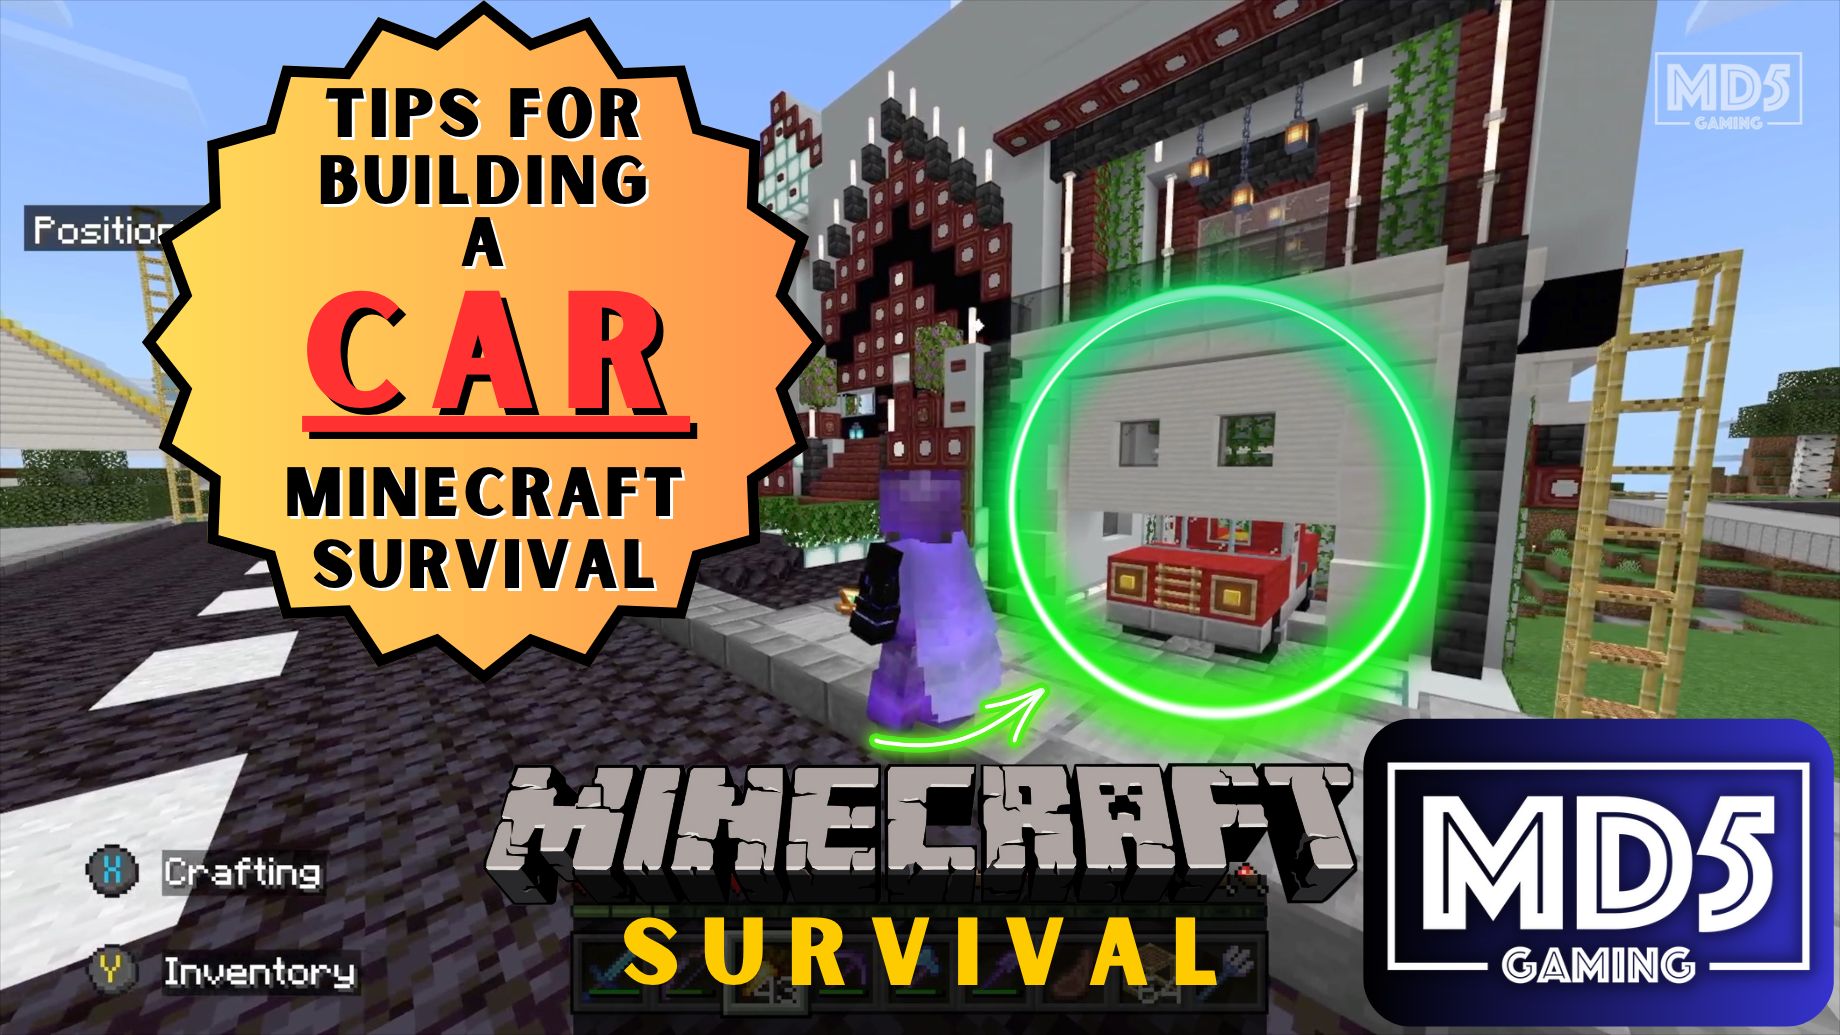 Tips For Building A Car In Minecraft Survival